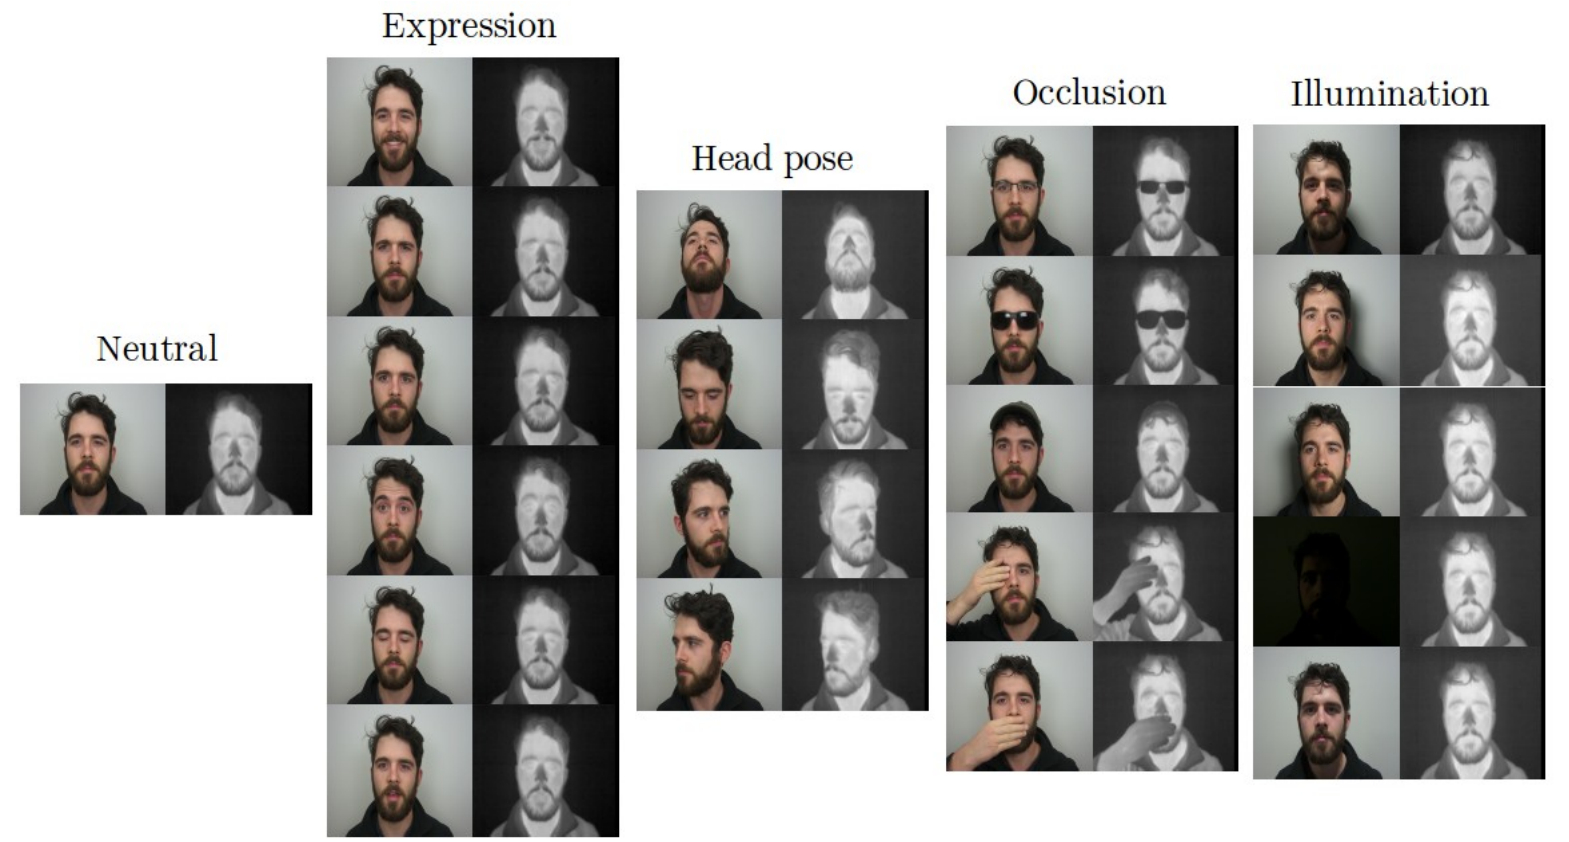 Figure 3: Illustration of visible and thermal images for various facial variations.